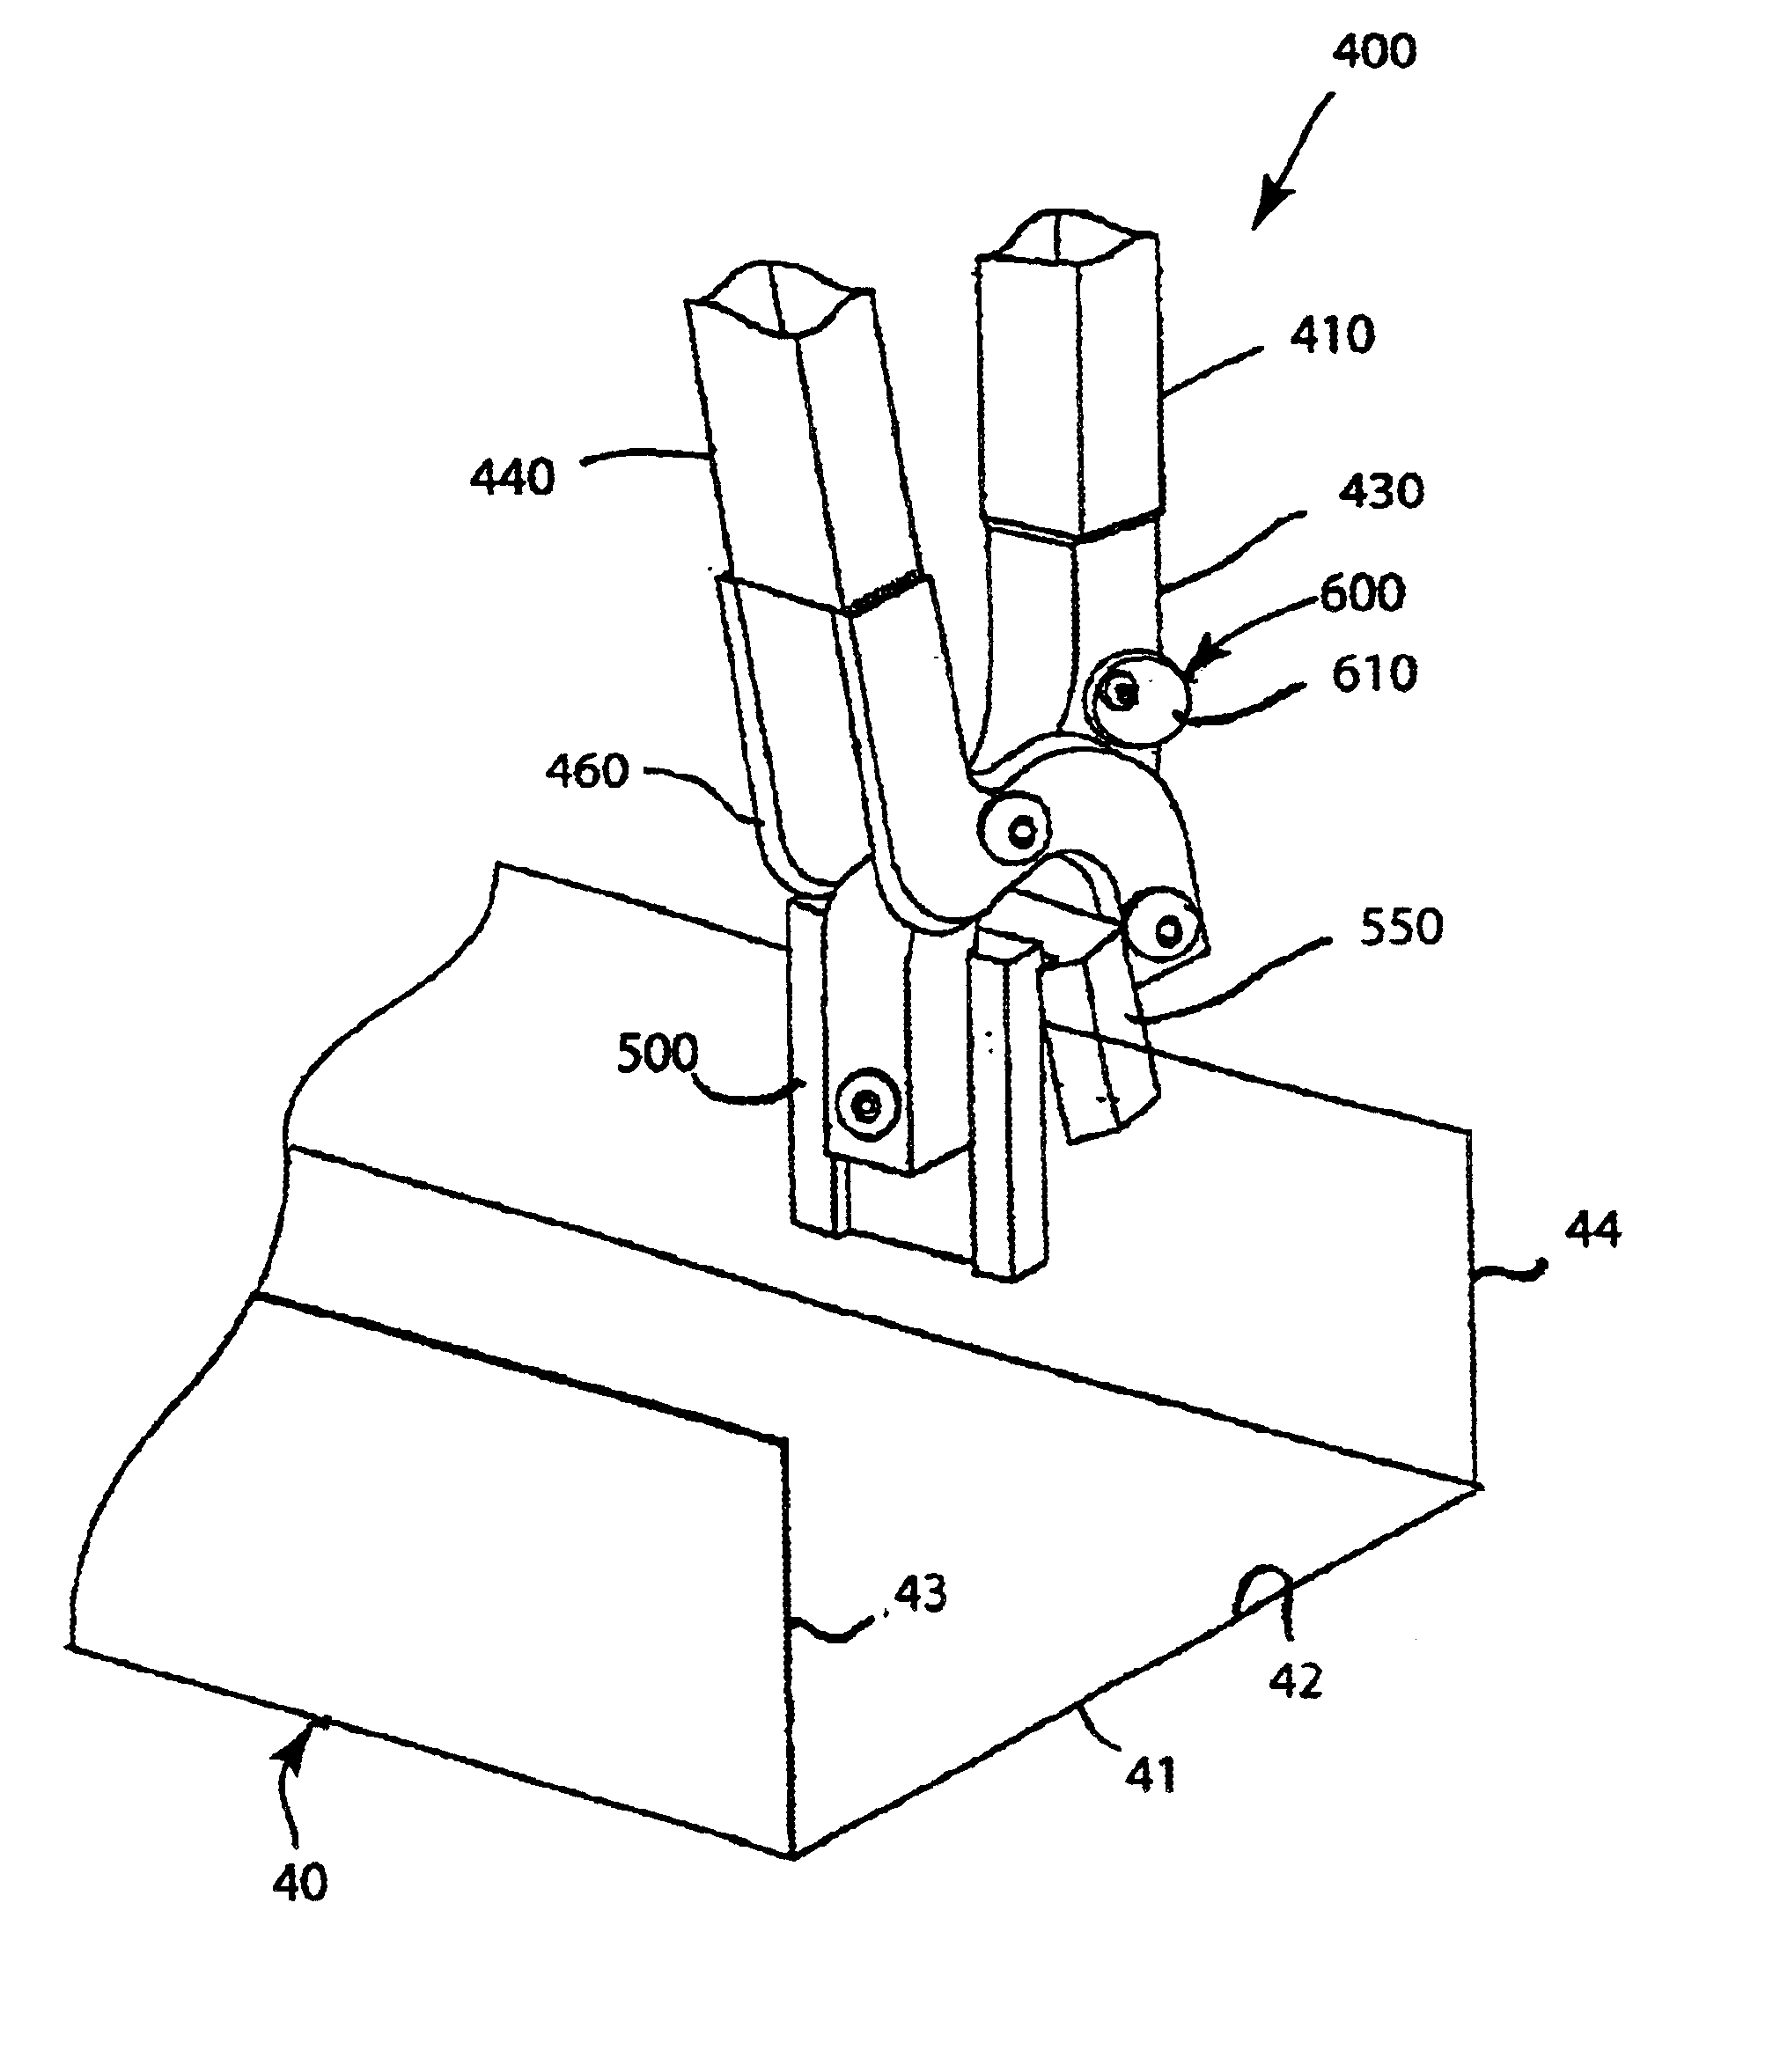 Tool for shaping a workpiece